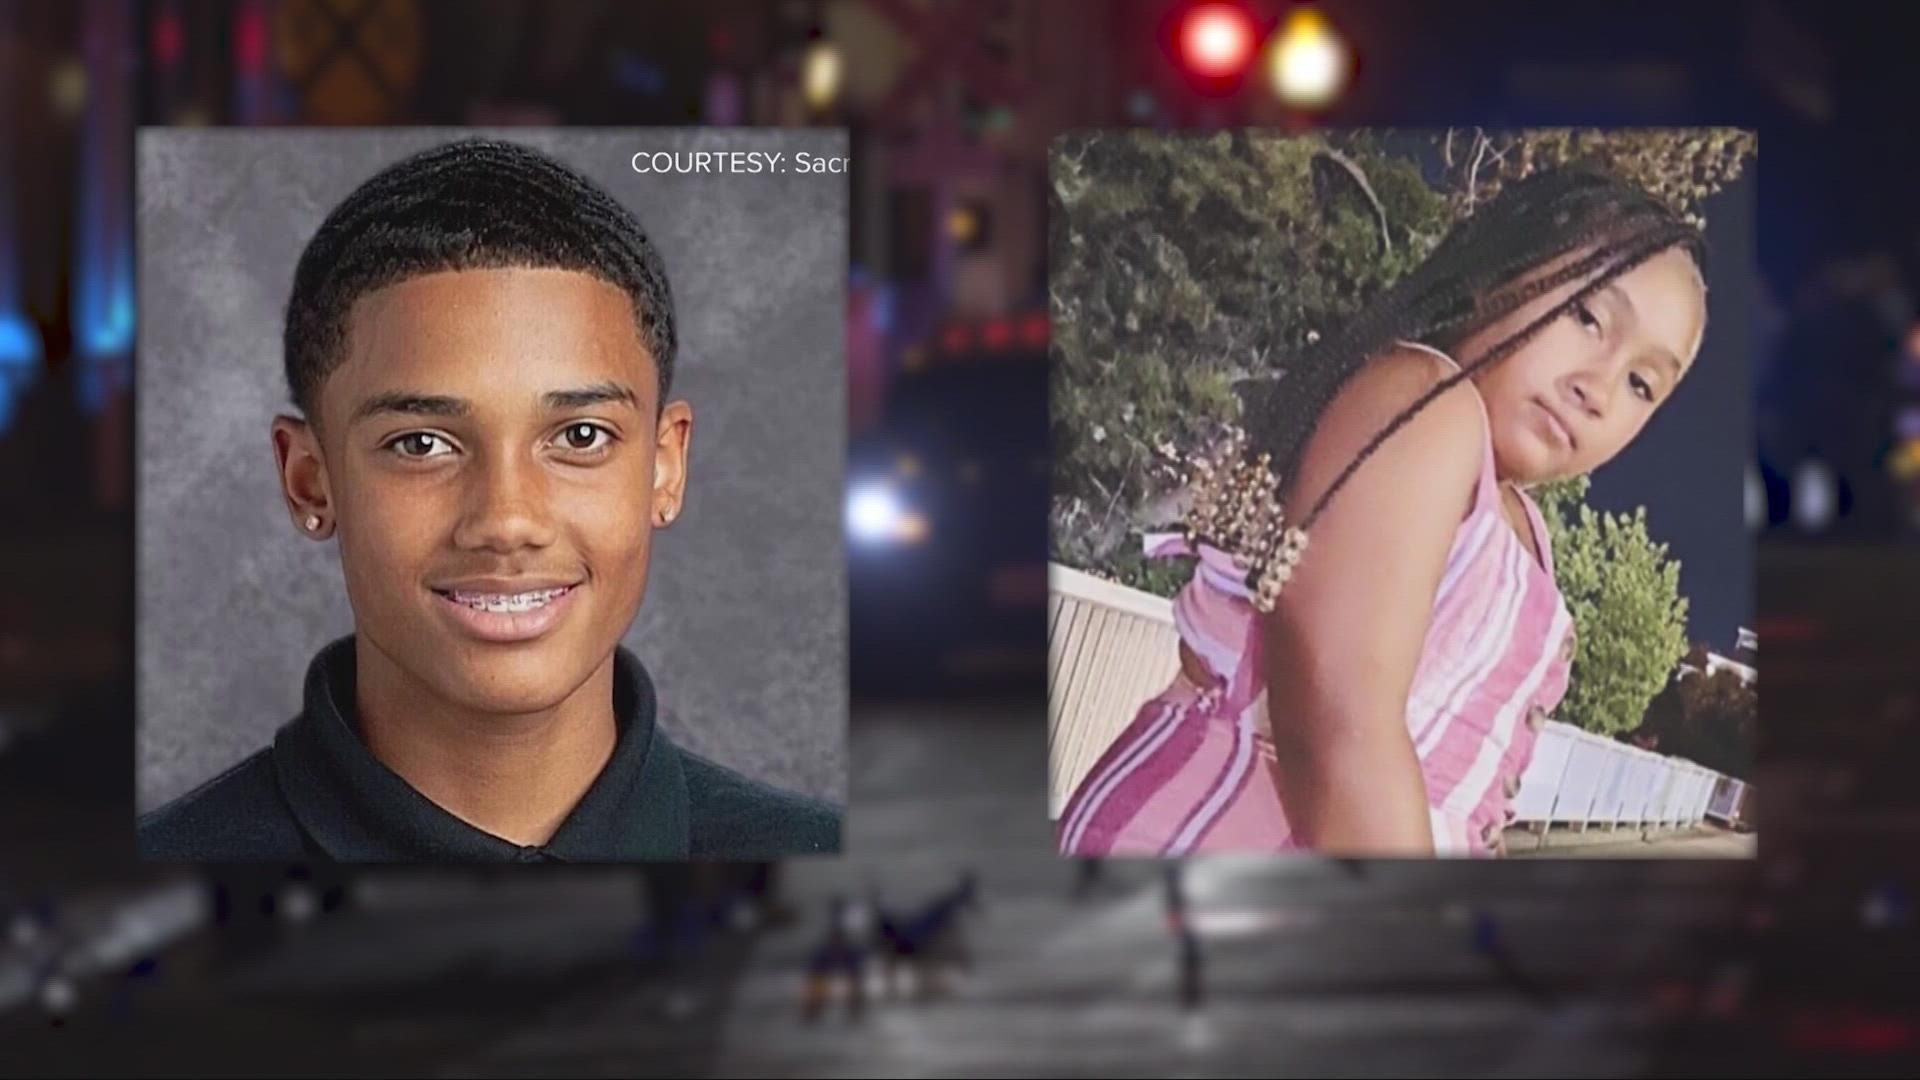 17-year-old Jaylen Betschart and 9-year-old Makaylah Brent were both killed by gunfire the same day during a weekend of bloodshed in Sacramento in October 2020.